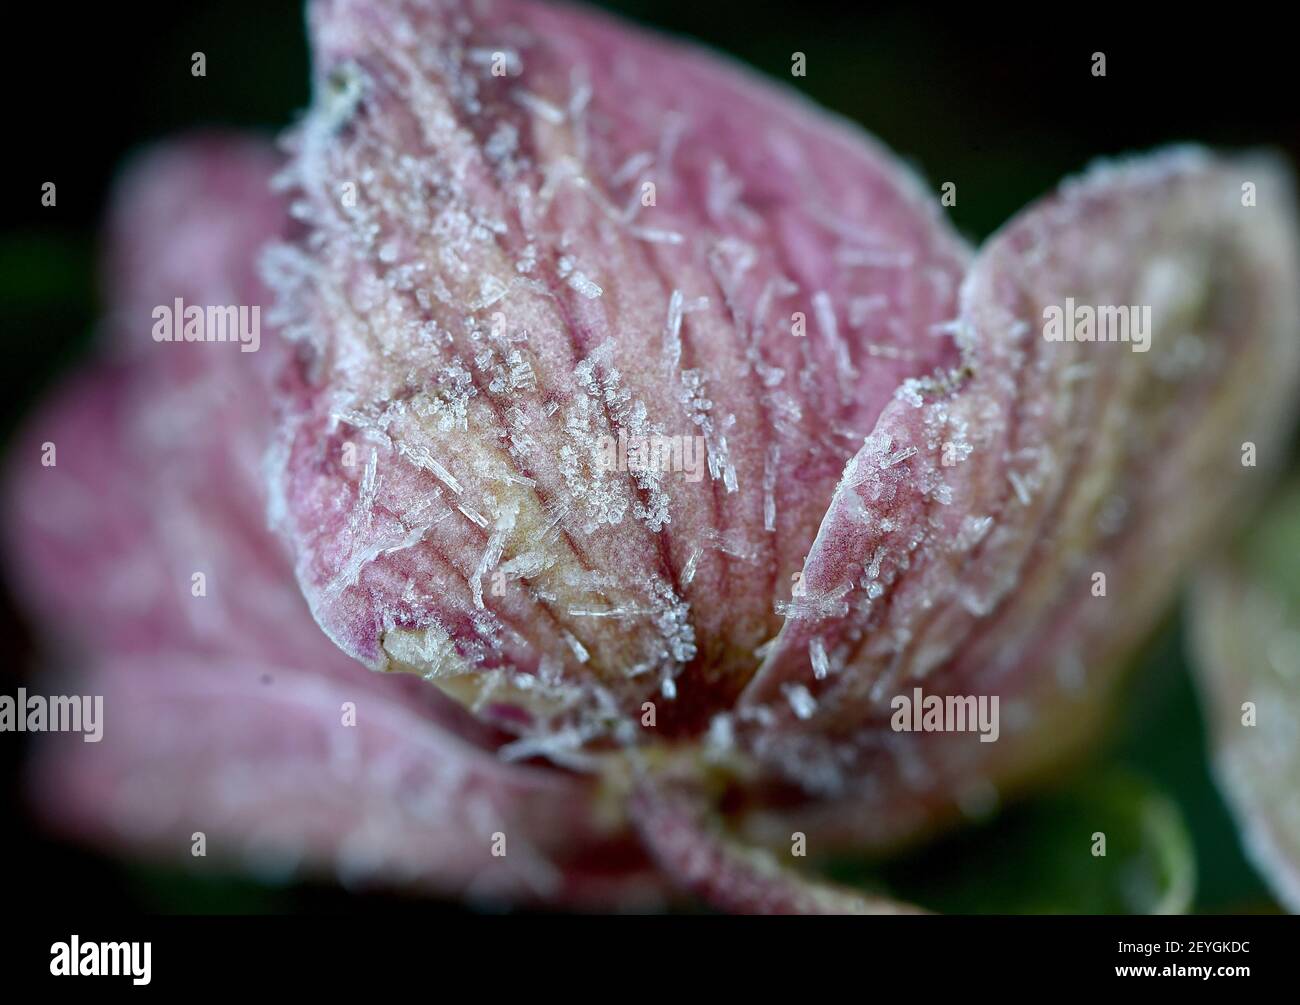 Lentil Rose High Resolution Stock Photography and Images - Alamy